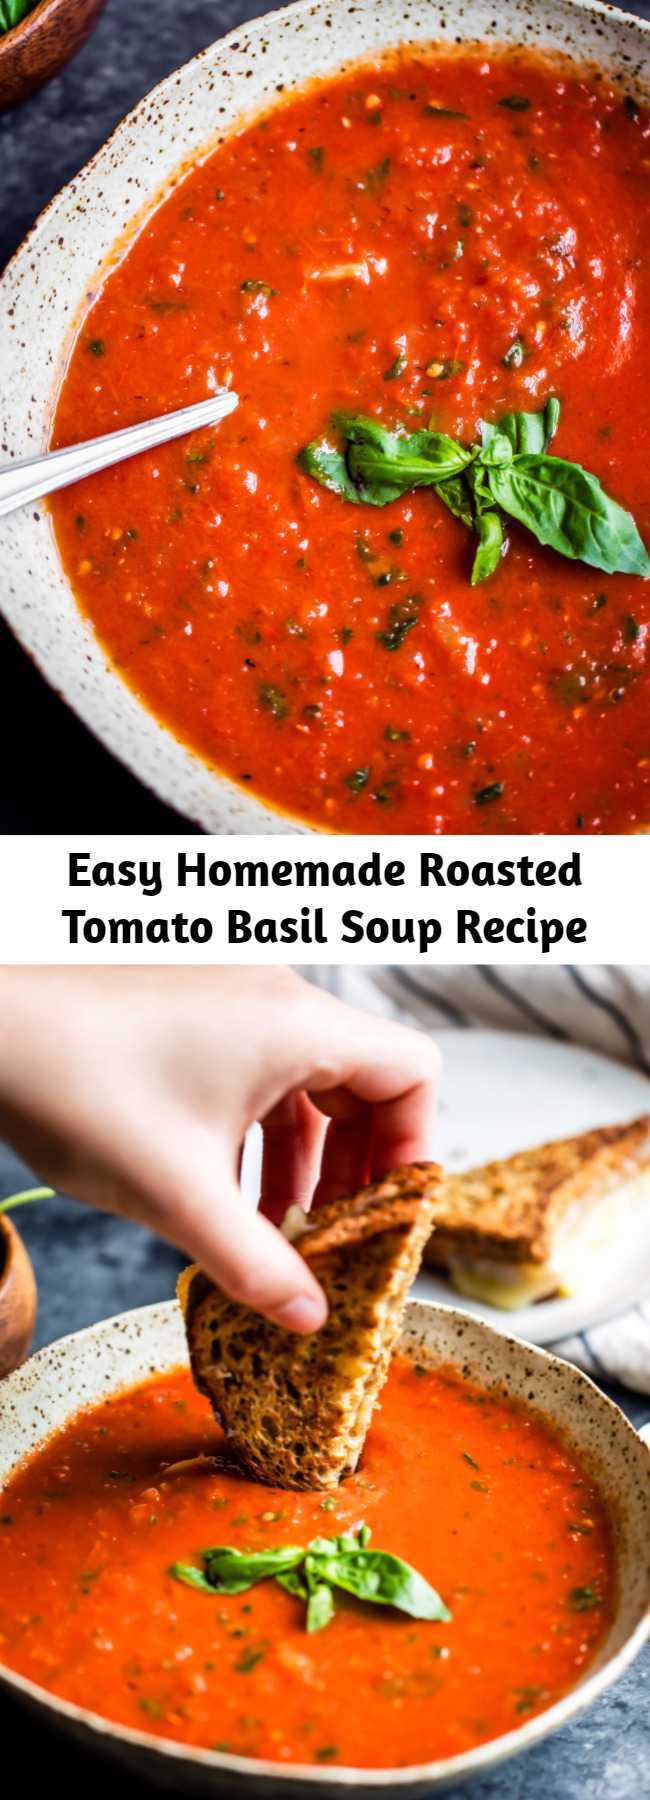 Easy Homemade Roasted Tomato Basil Soup Recipe - The Best homemade roasted tomato basil soup with fresh tomatoes, garlic, olive oil and caramelized onions and optional add-ins for extra creaminess. Delicious, flavorful and the best way to use up garden tomatoes! You’ll never want to go back to the canned stuff after you try this. #tomatoes #tomatosoup #homemadesoup #tomatorecipe #healthylunch #vegetarian #vegan #glutenfree